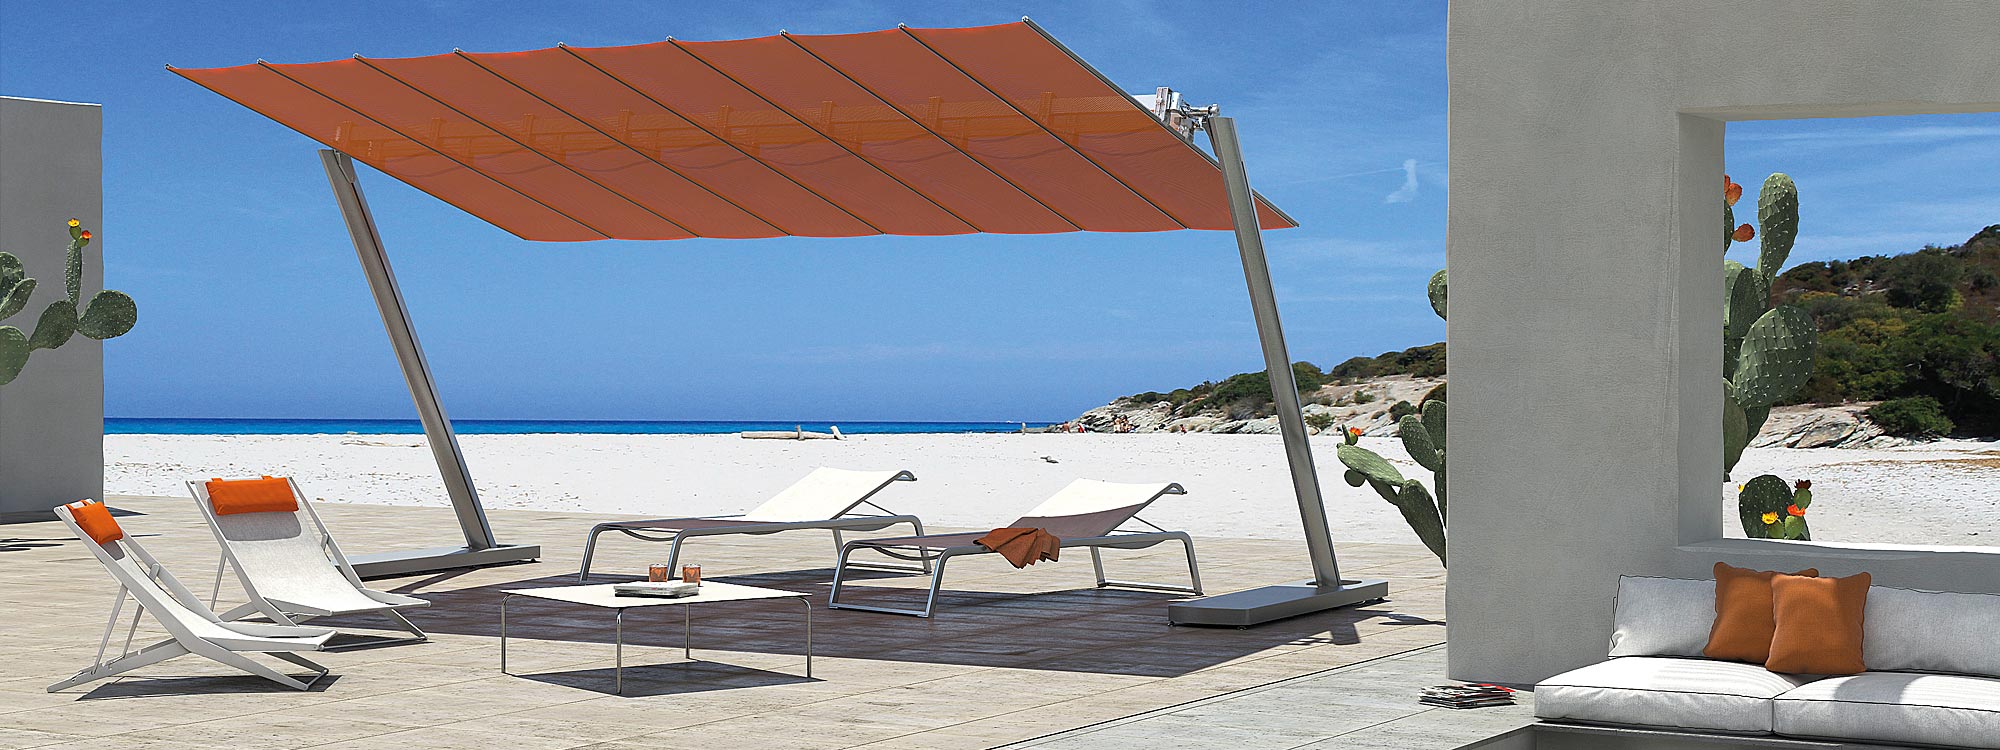 Image of Orange Flexy Zen retractable awning shading Coro L3 loungers and Boomy folding chairs. Shown on decking on hot and sandy beach.